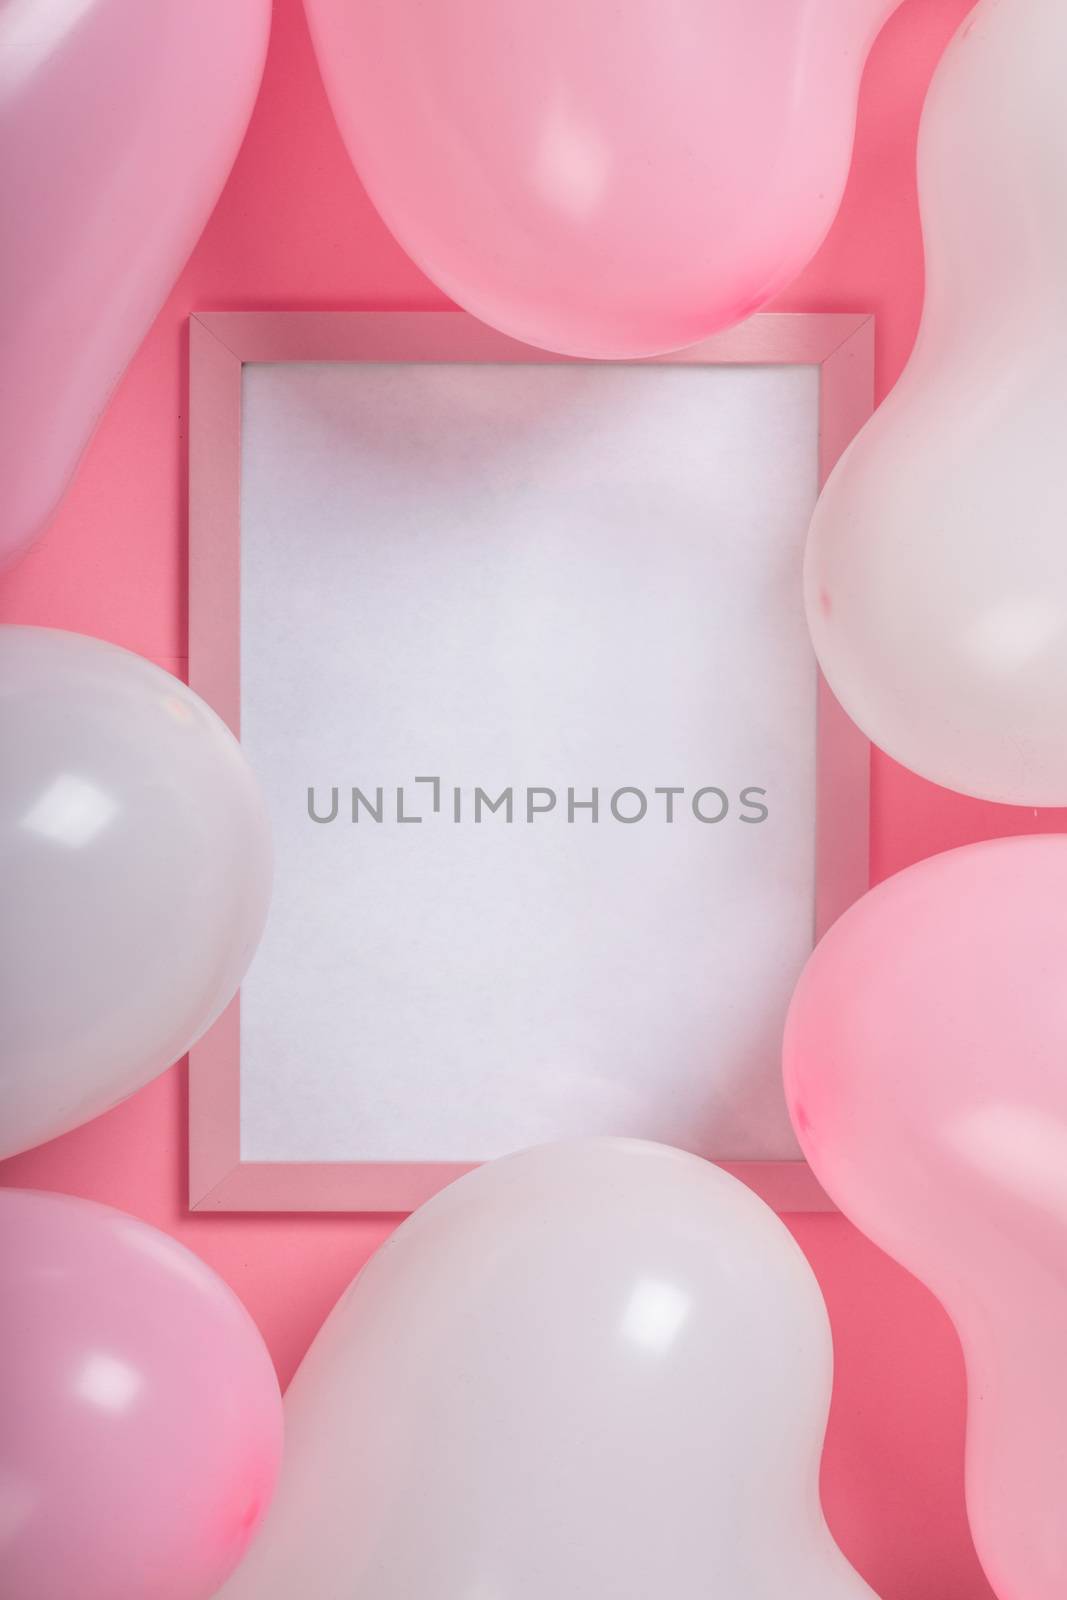 Happy valentines day greetings many heart shaped pink balloons and foto frame with copy space for text , background border flat lay with copy space for text